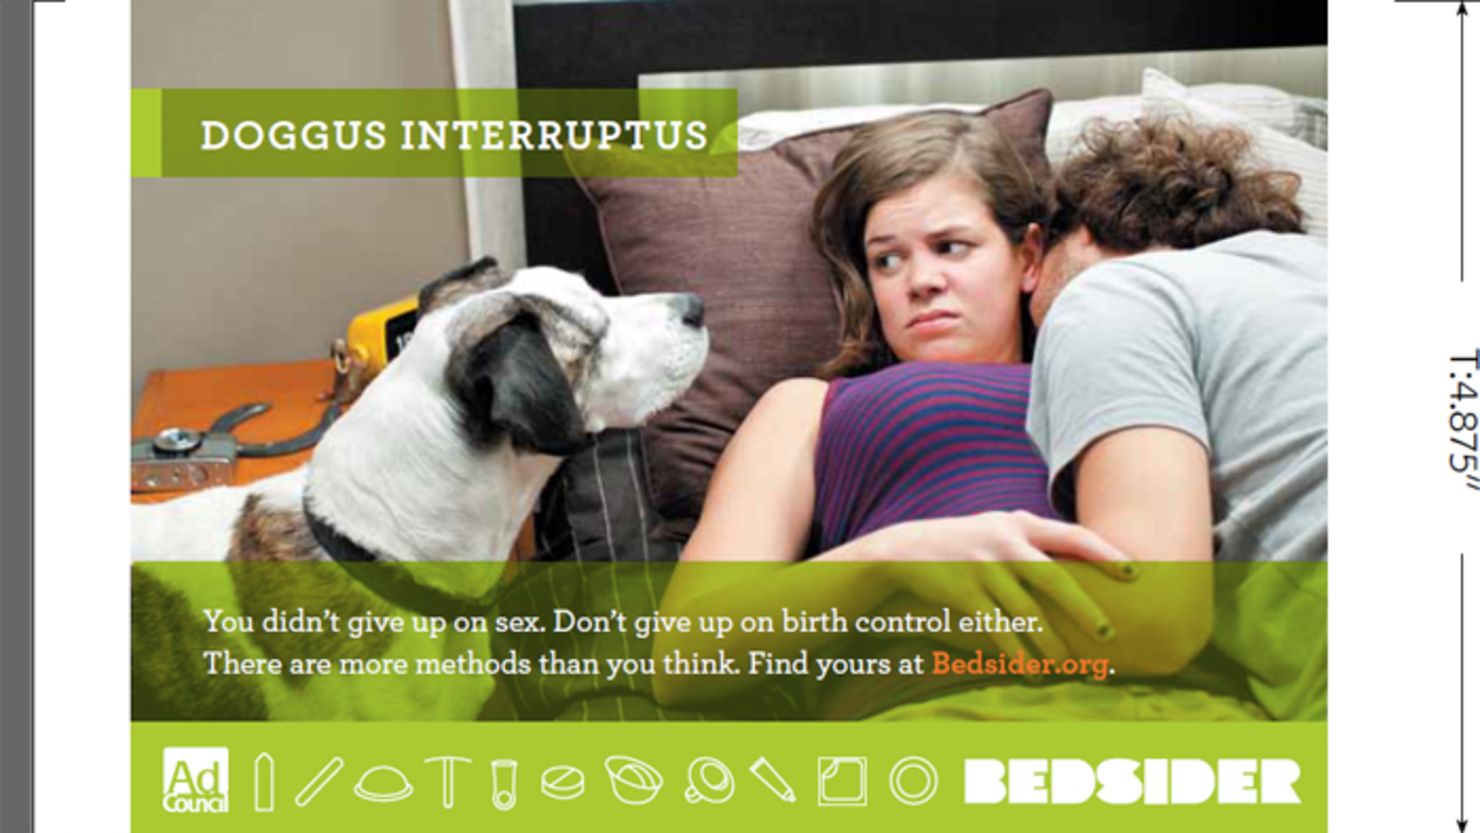 A dog keeps his eye on a couple in this campaign ad.